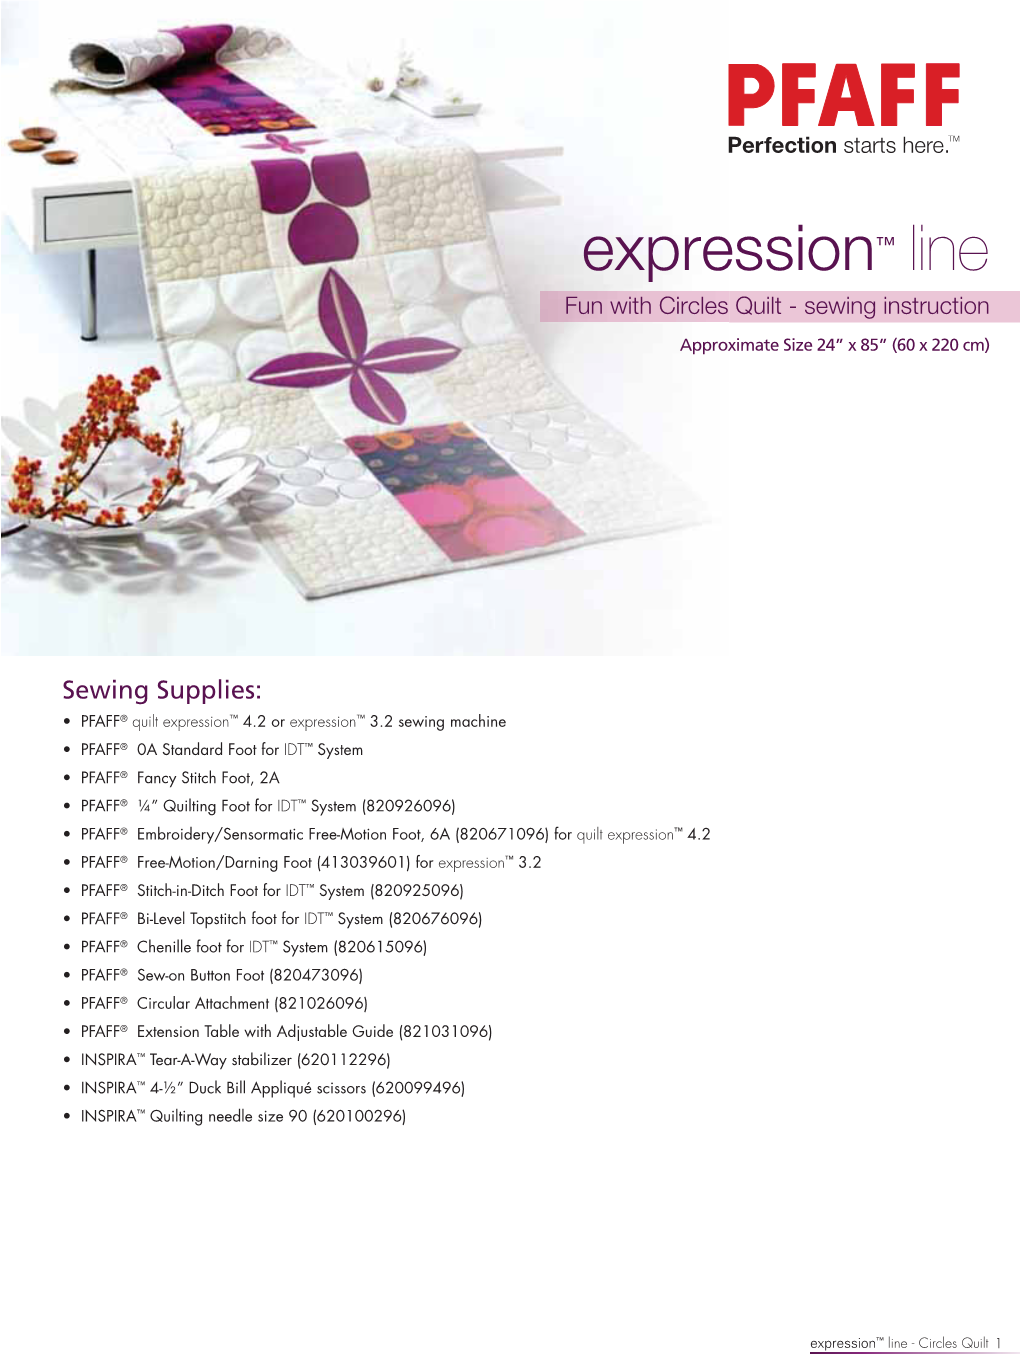 Expression™ Line Fun with Circles Quilt - Sewing Instruction